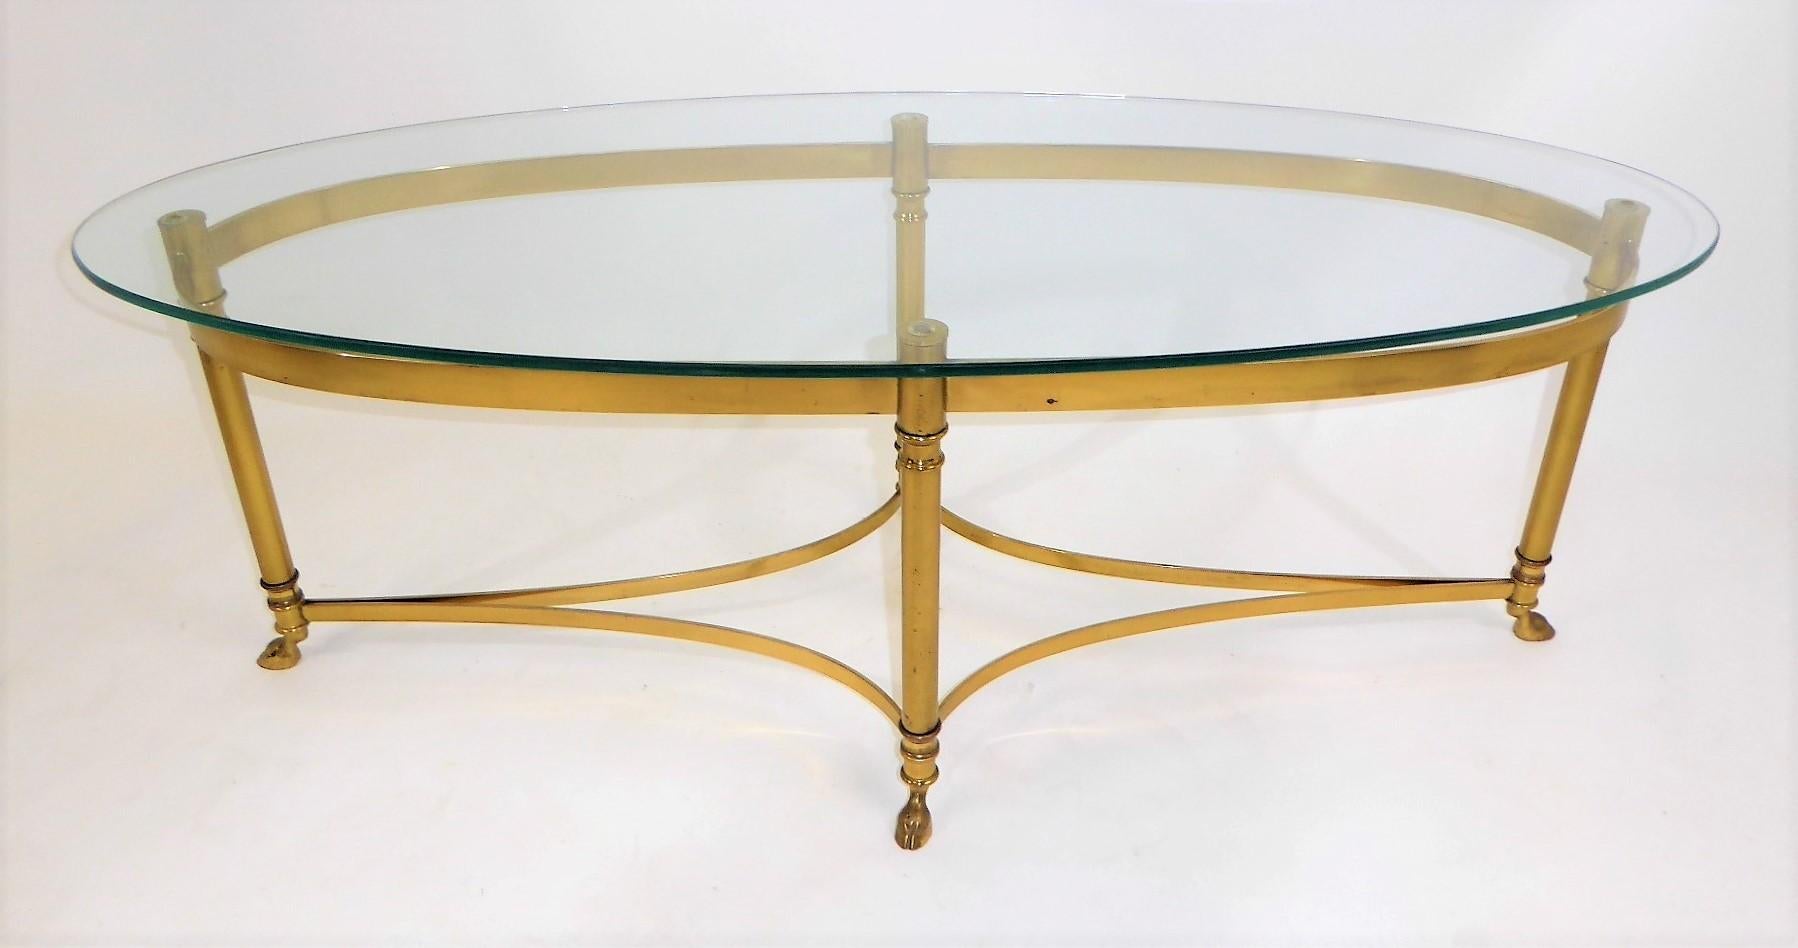 Fine 1970s Labarge brass long oval coffee table featuring modern Hollywood Regency lines with Louis XVI styling with hooved feet and a new glass top. The styling reminding one of Maison Jansen table designs. The glass is new and the brass exhibits a